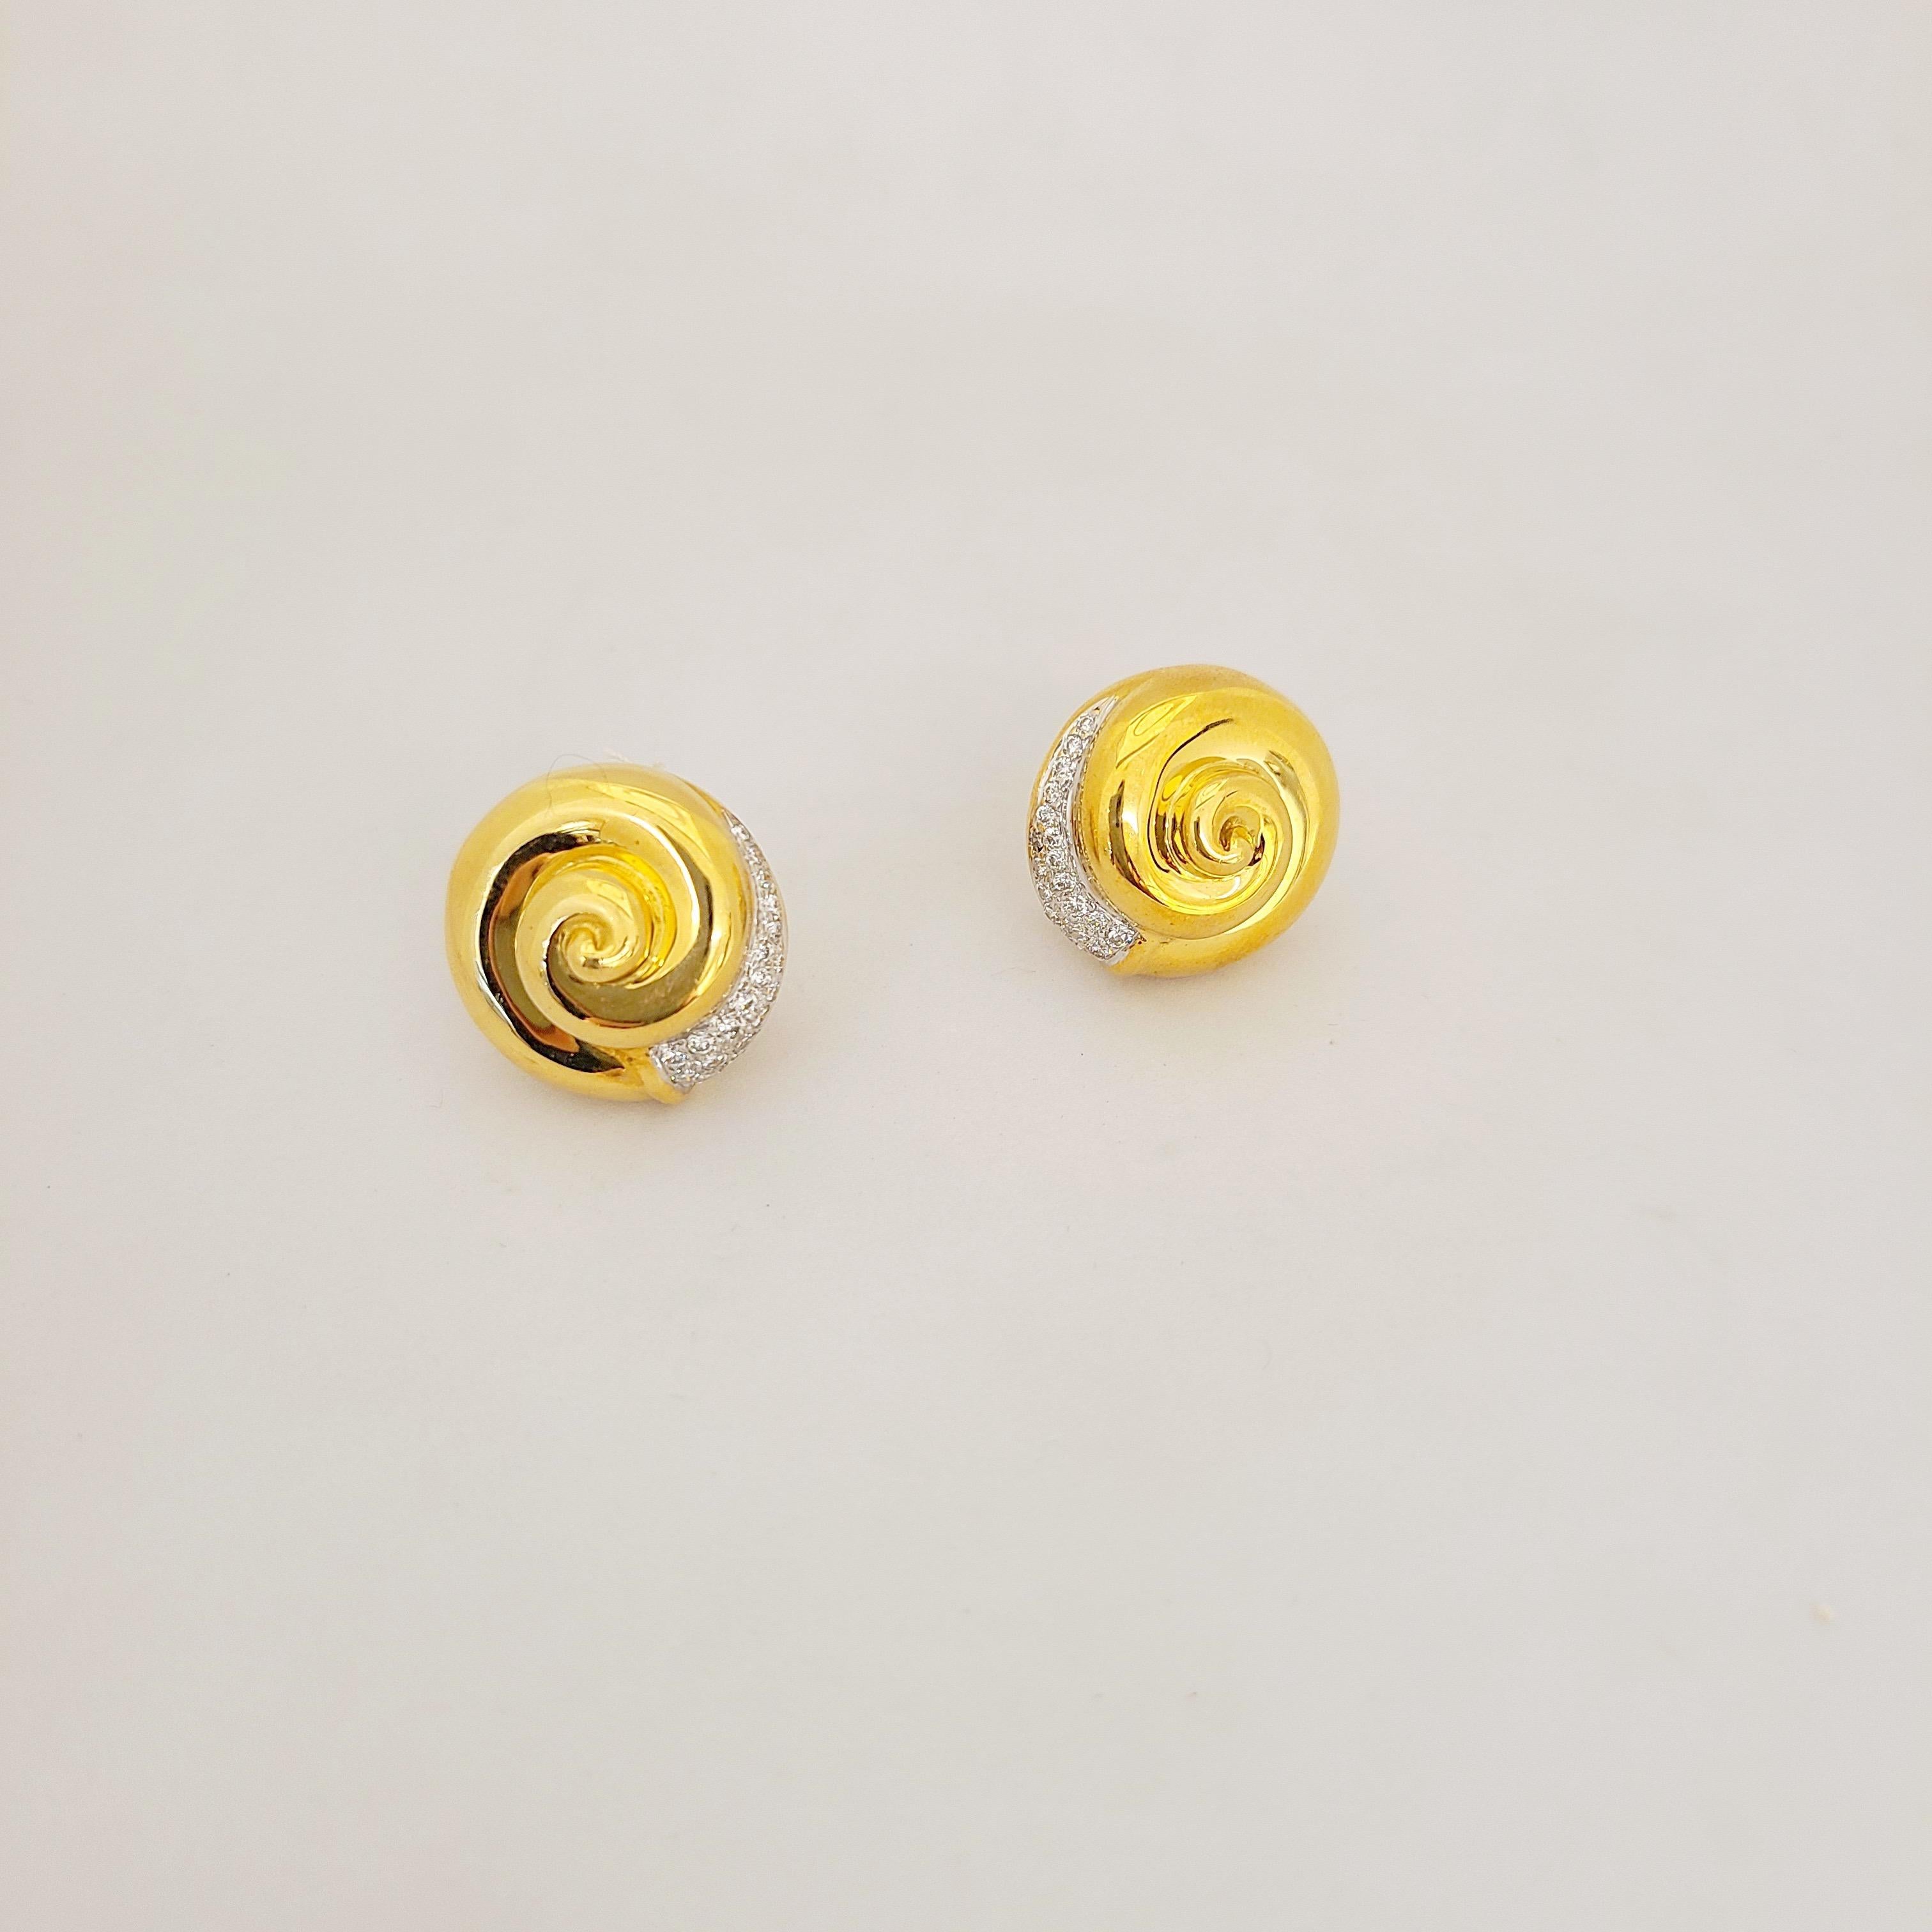 These 18 karat gold button earrings are designed in a high polished yellow gold swirl accented with round brilliant diamonds. The earrings measure 3/4